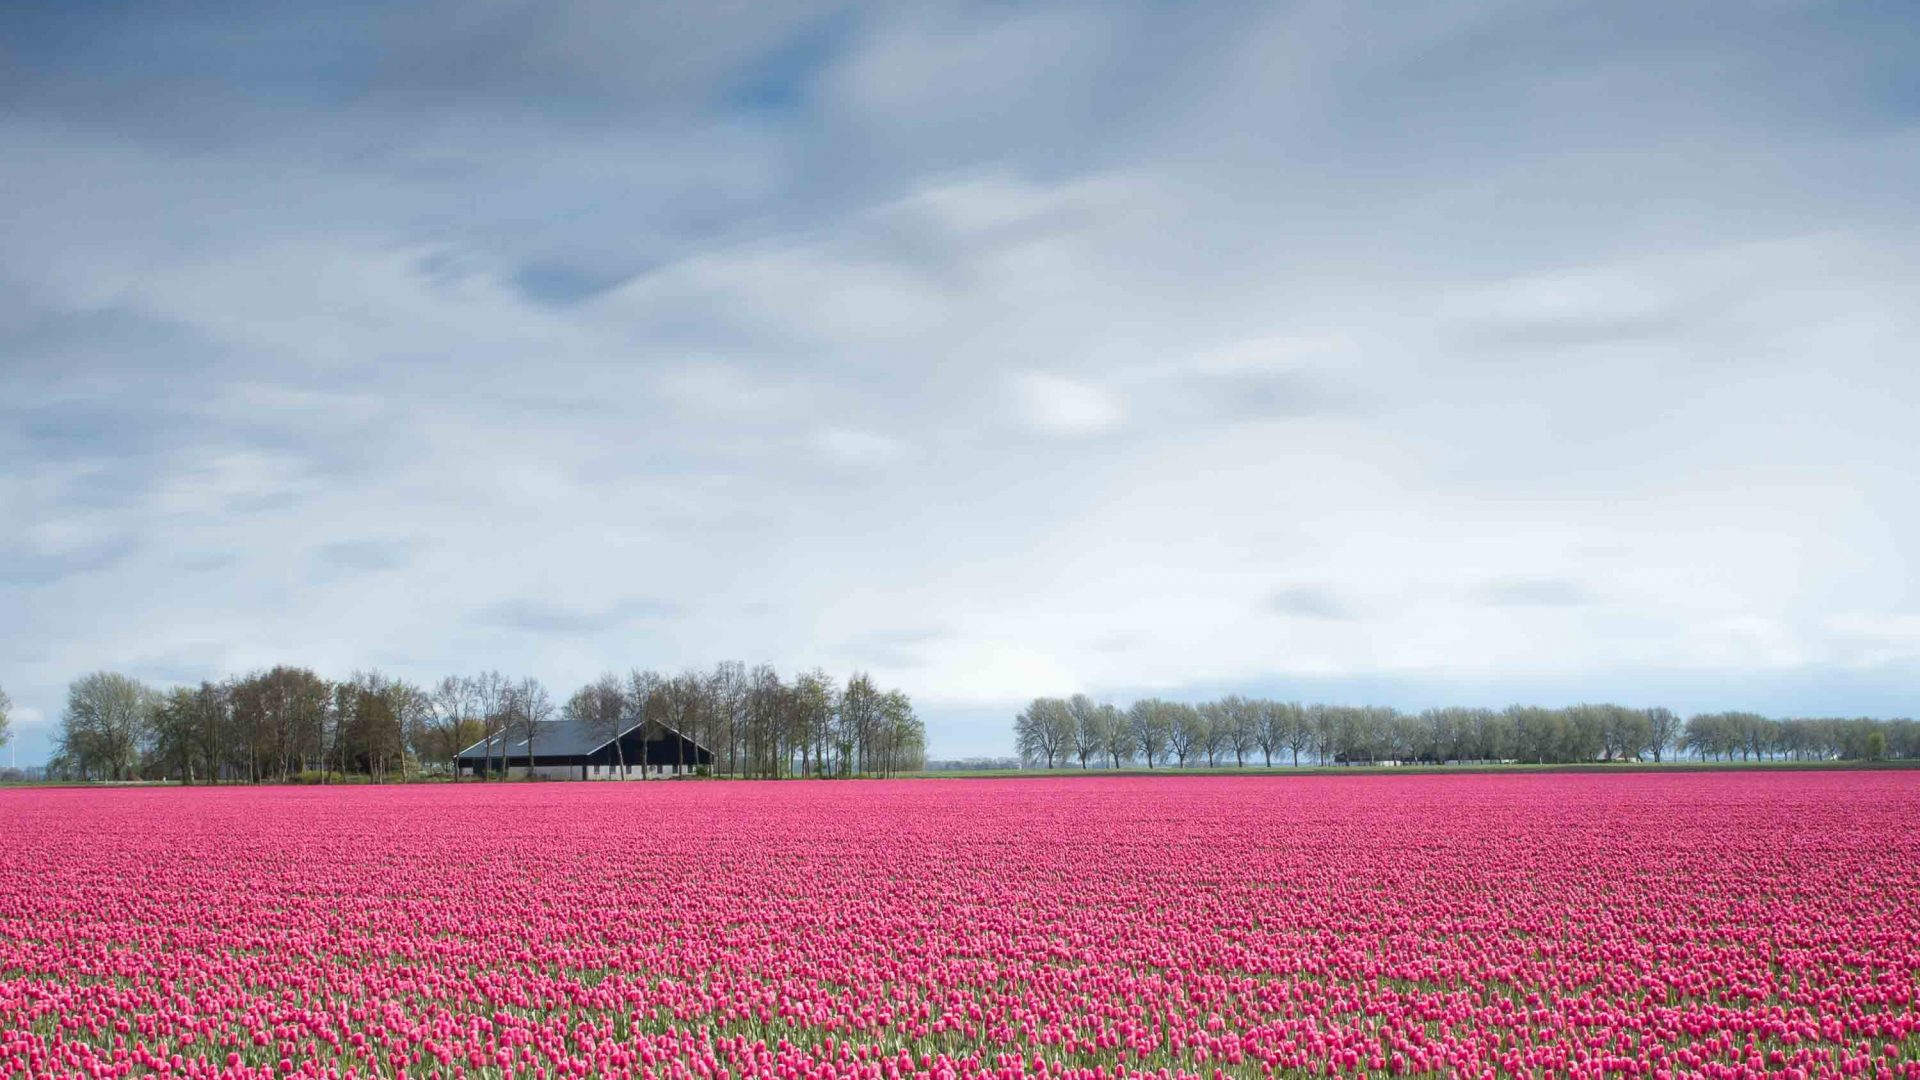 The pink flowers bring this field in Lelystad in the Netherlands to life.